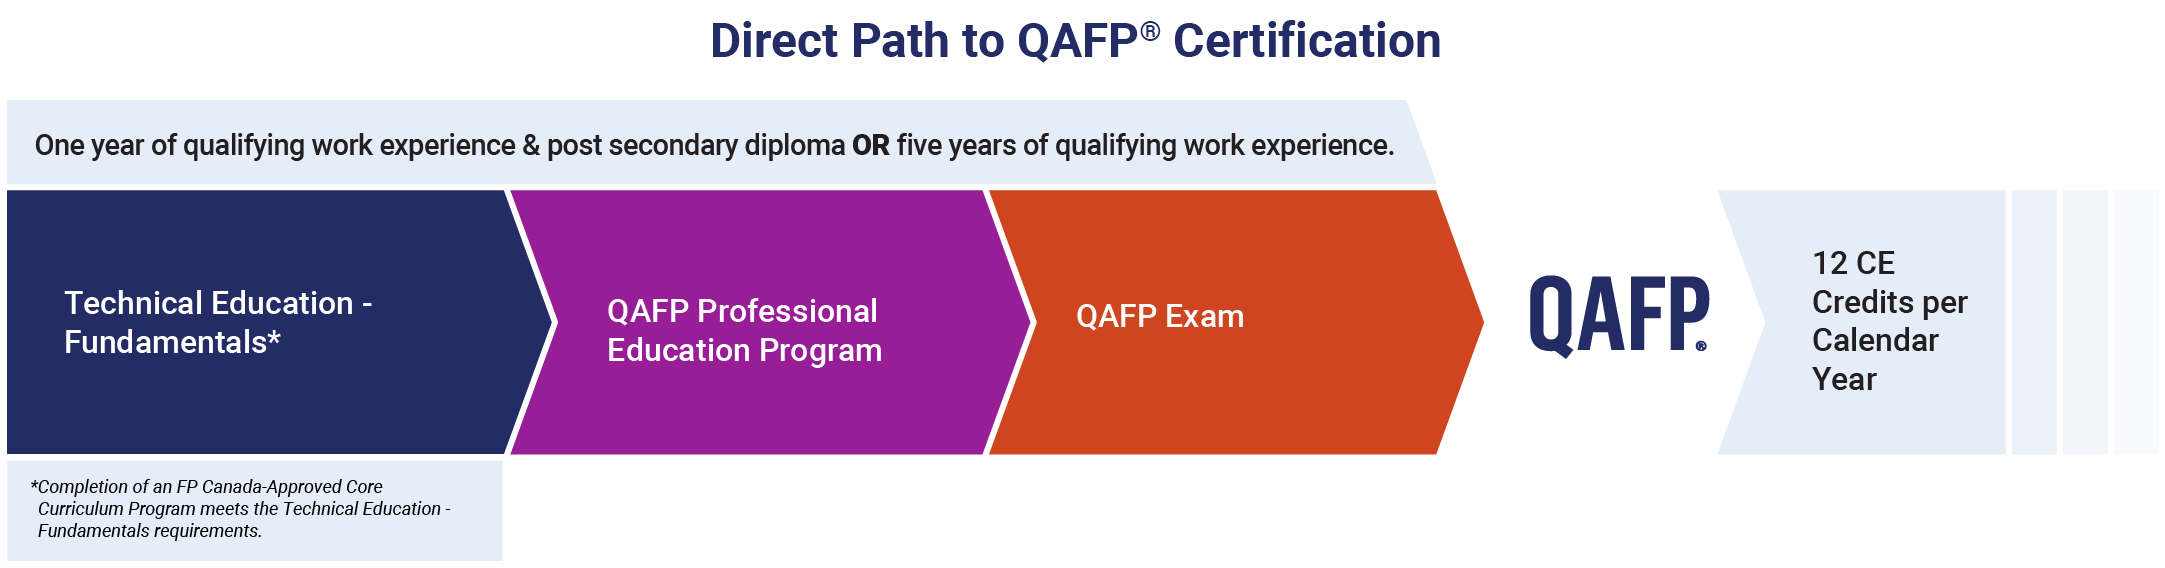 Direct Path to QAFP Certification